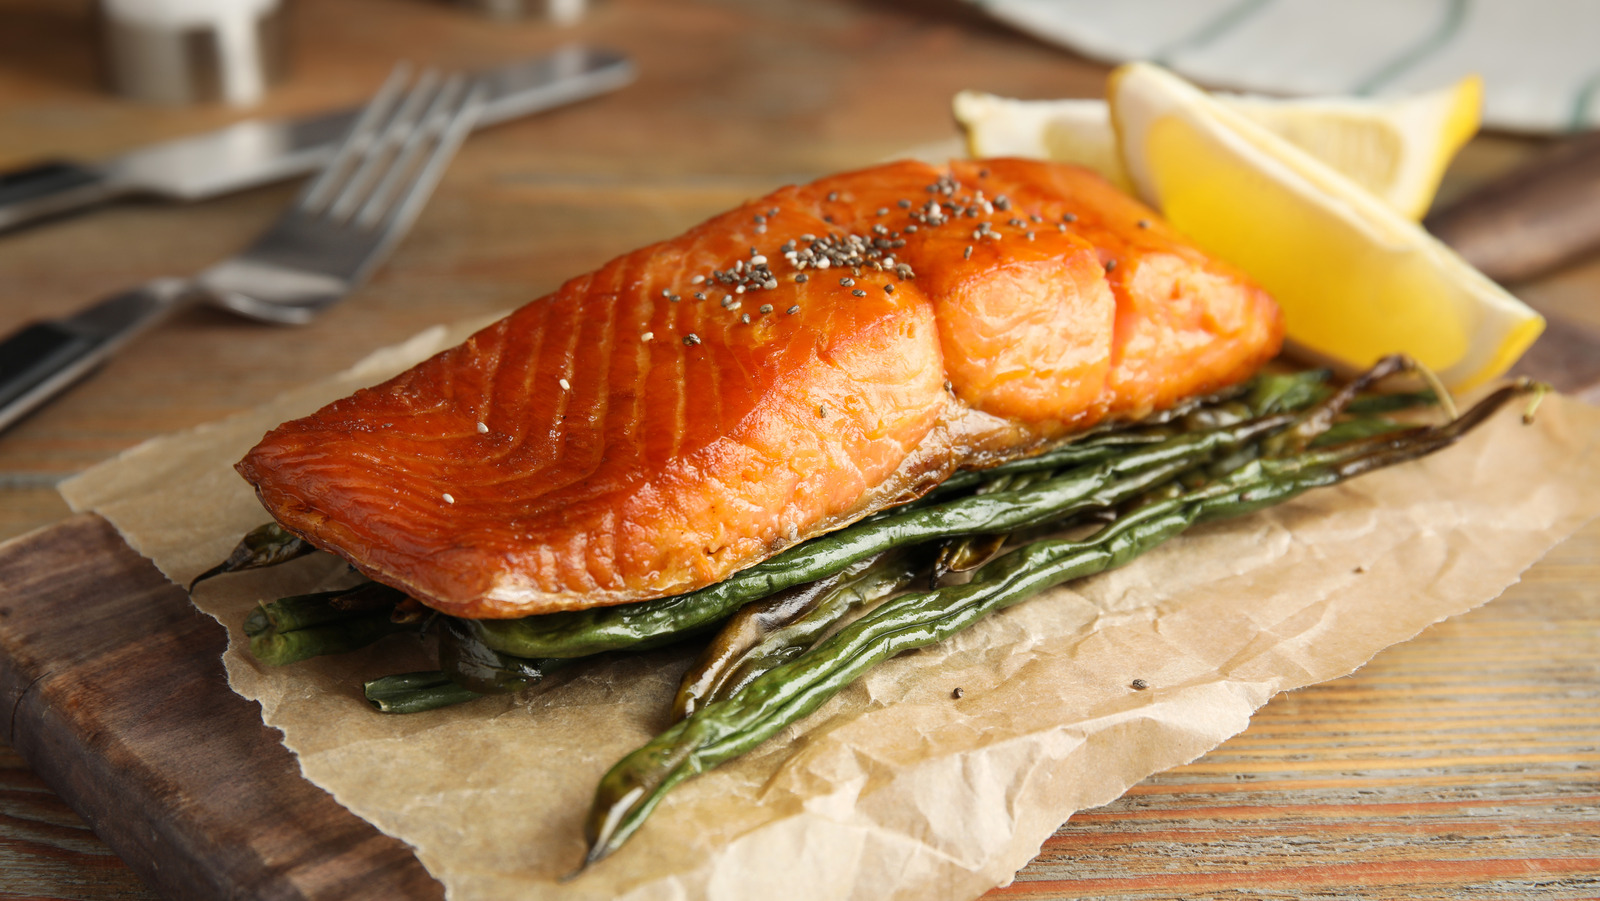 Does Salmon Need To Be Flipped While Cooking In The Air Fryer?